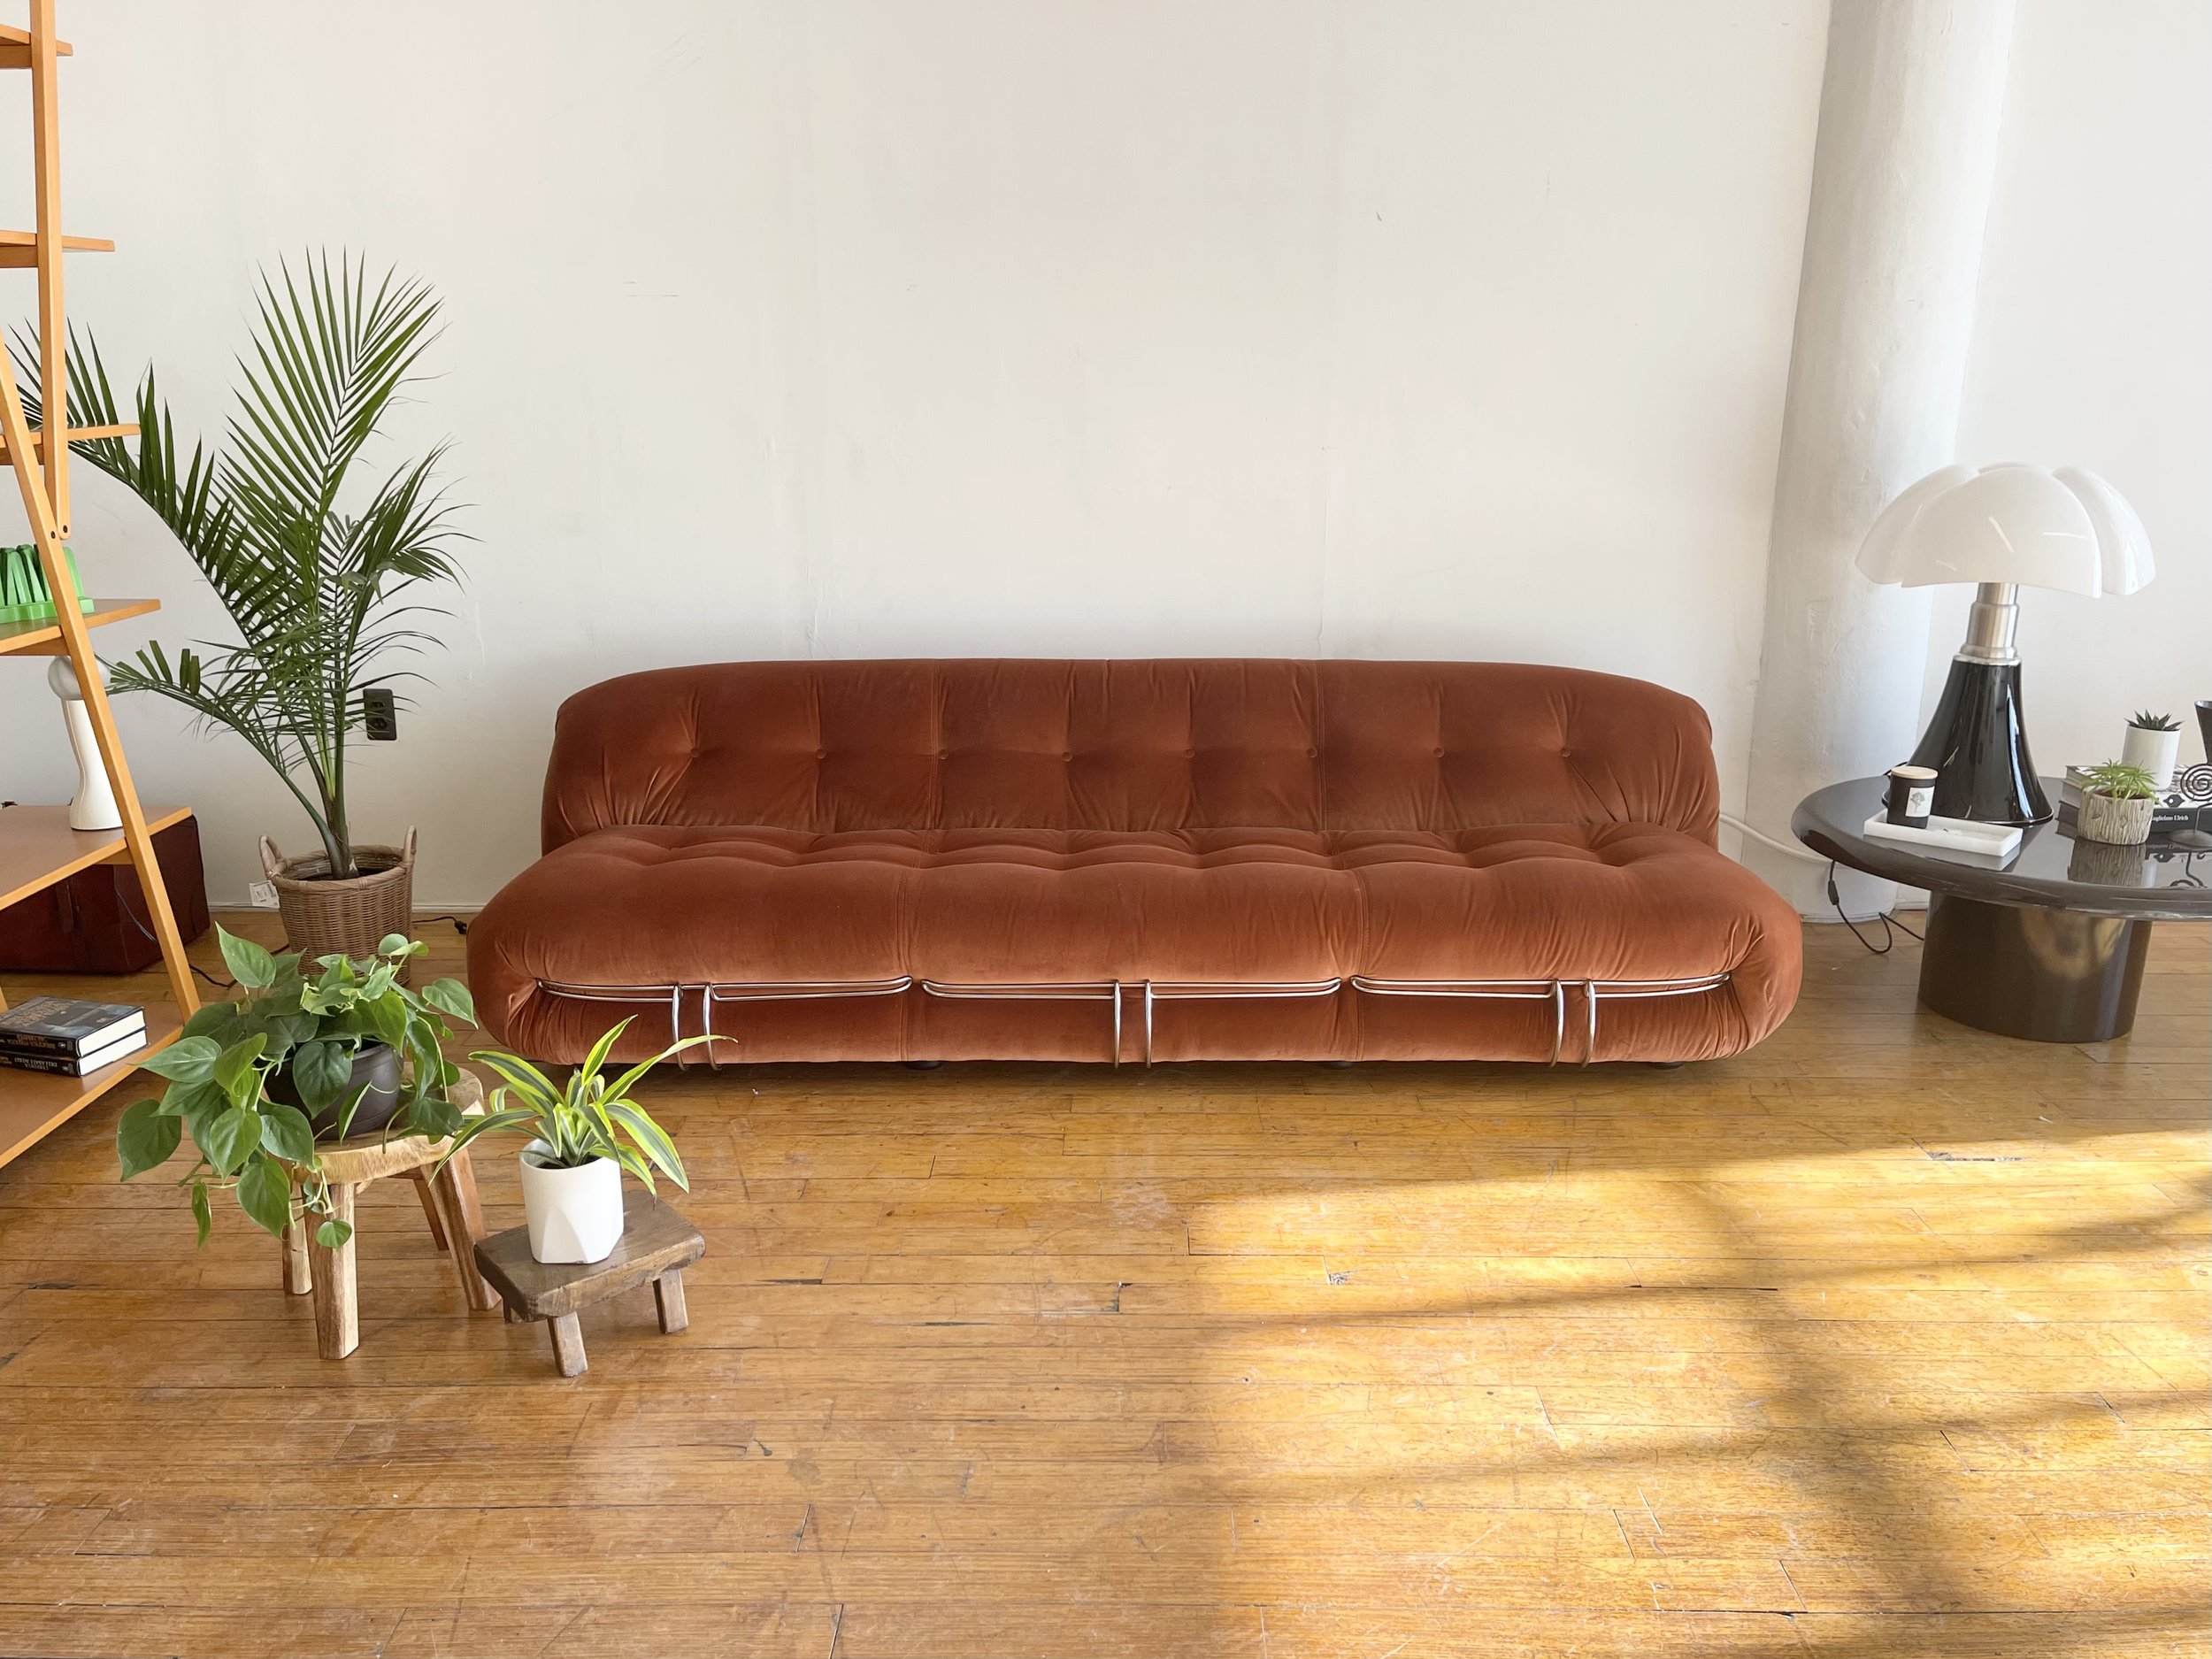 Vintage Soriana sofa: front view at the gallery display with tables and lamps